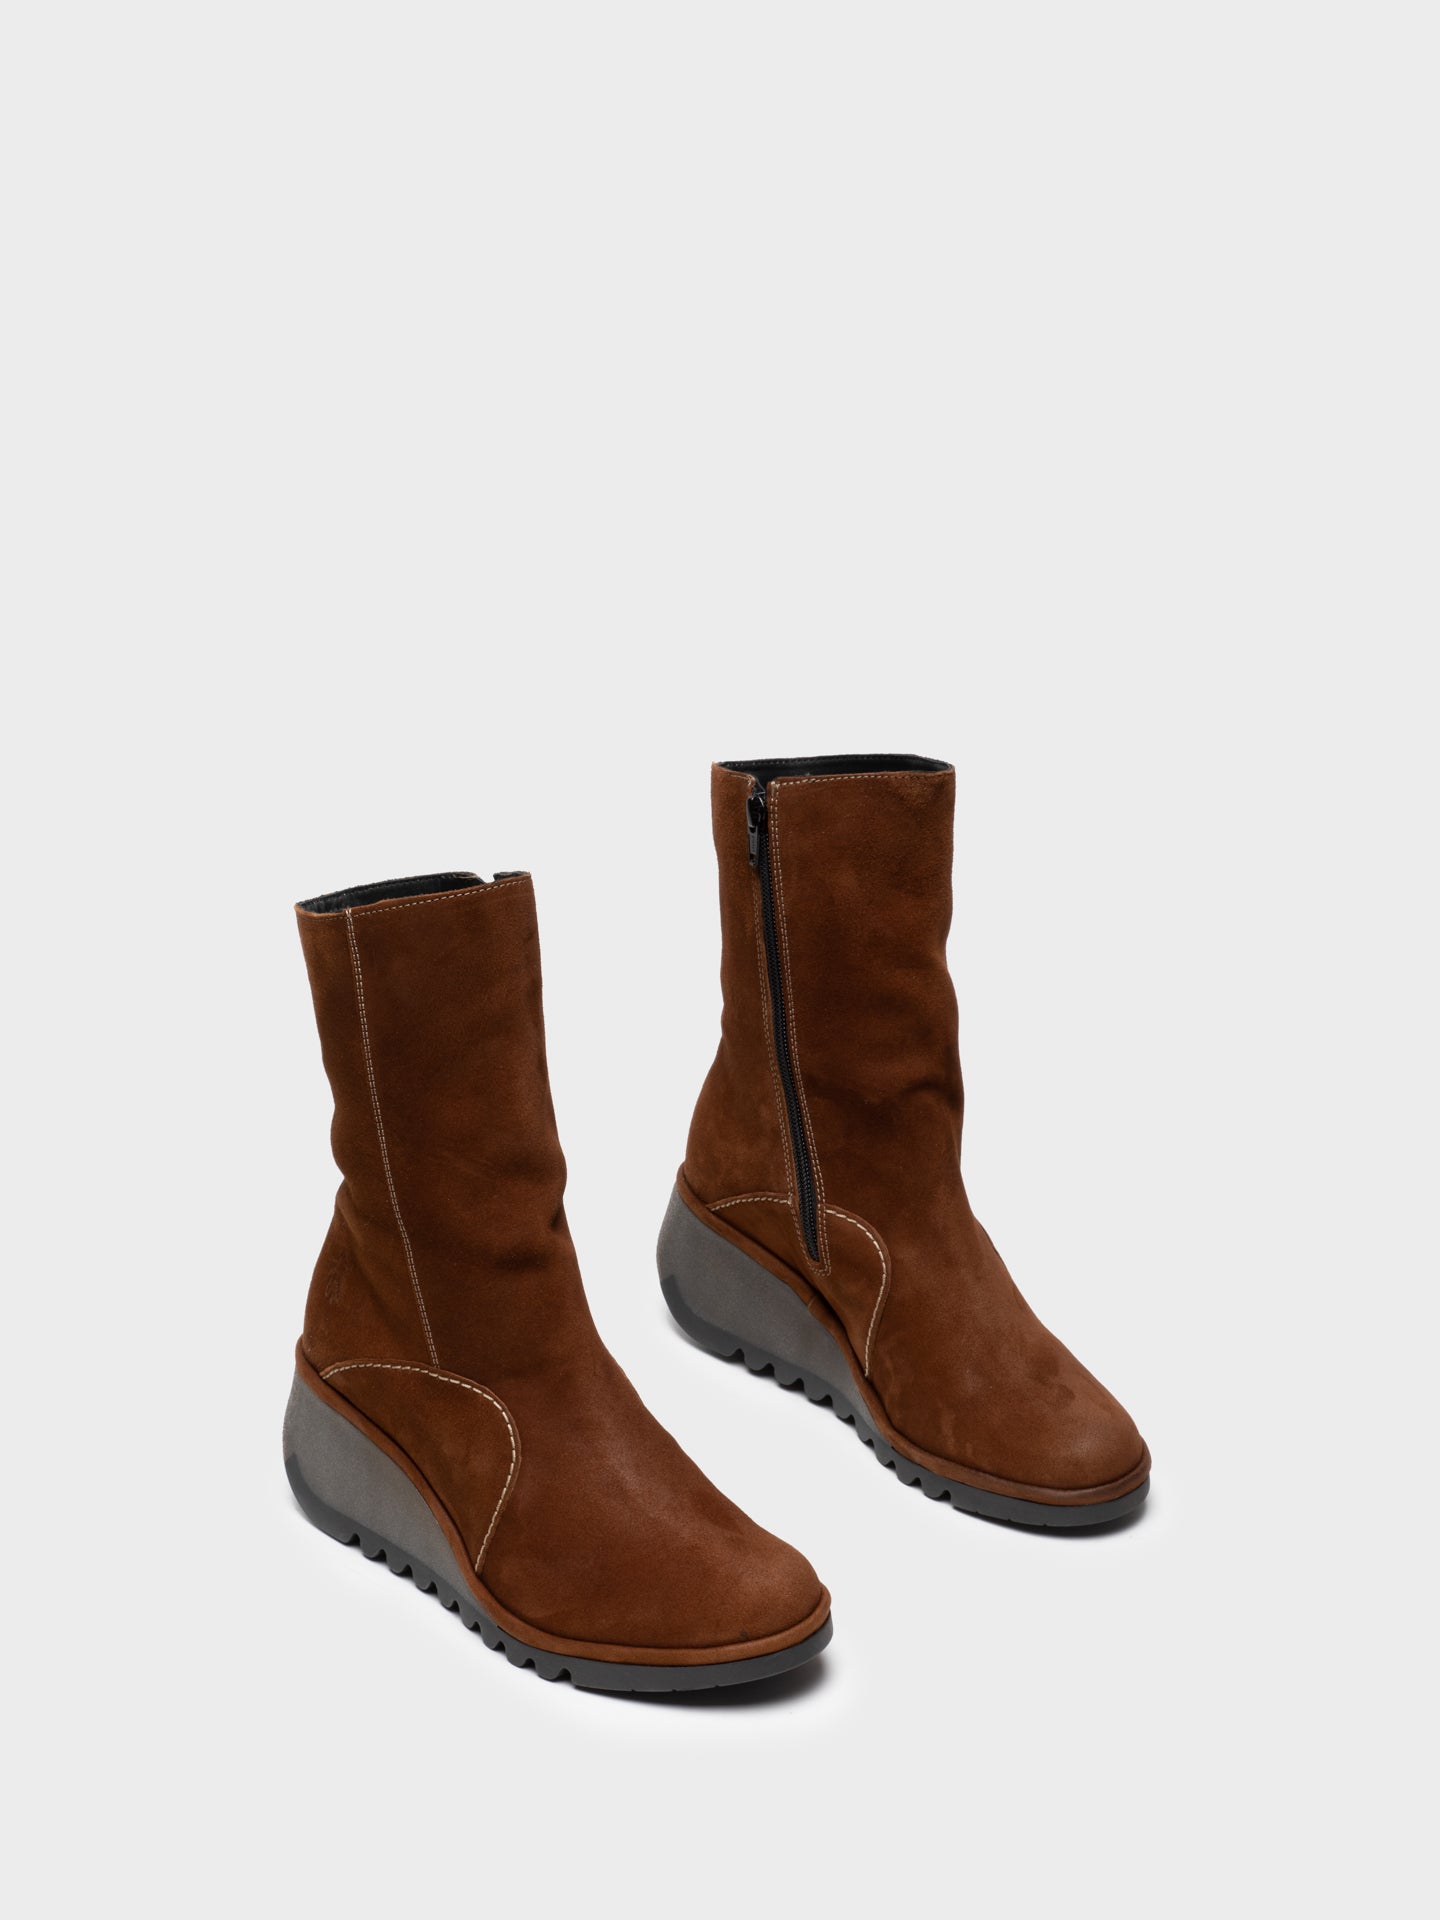 Fly London Chocolate Zip Up Ankle Boots